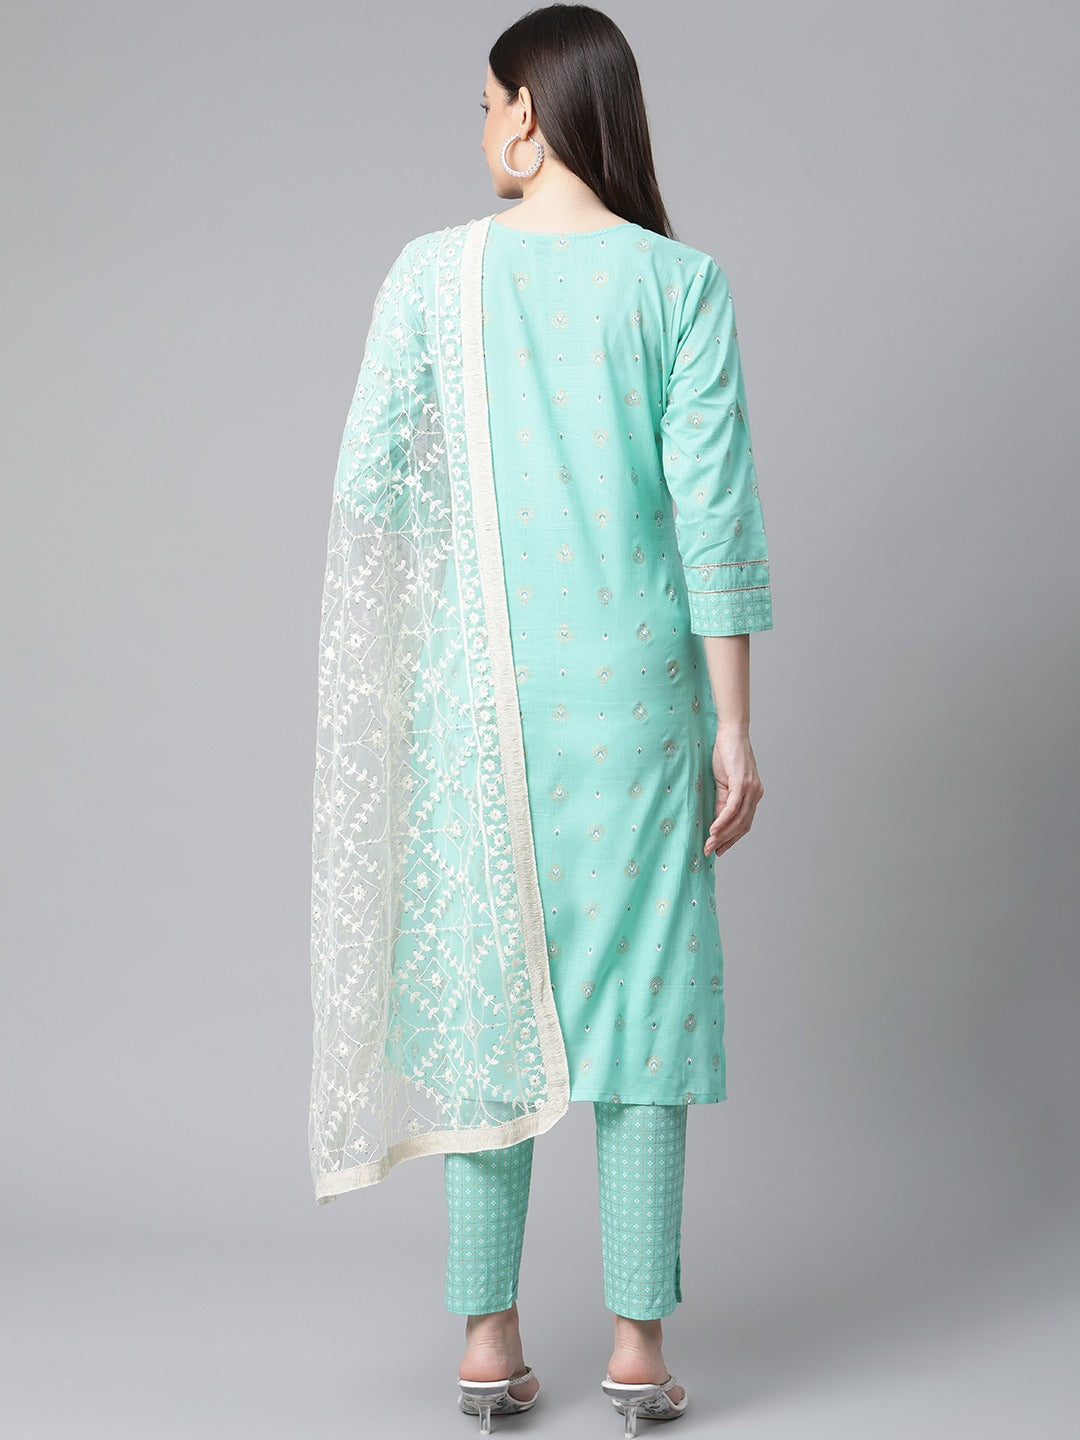 Women's Green Floral Printed Regular Pure Cotton Kurta with Trousers & With Dupatta ( JOKS D28W 1412 Green ) - Jompers